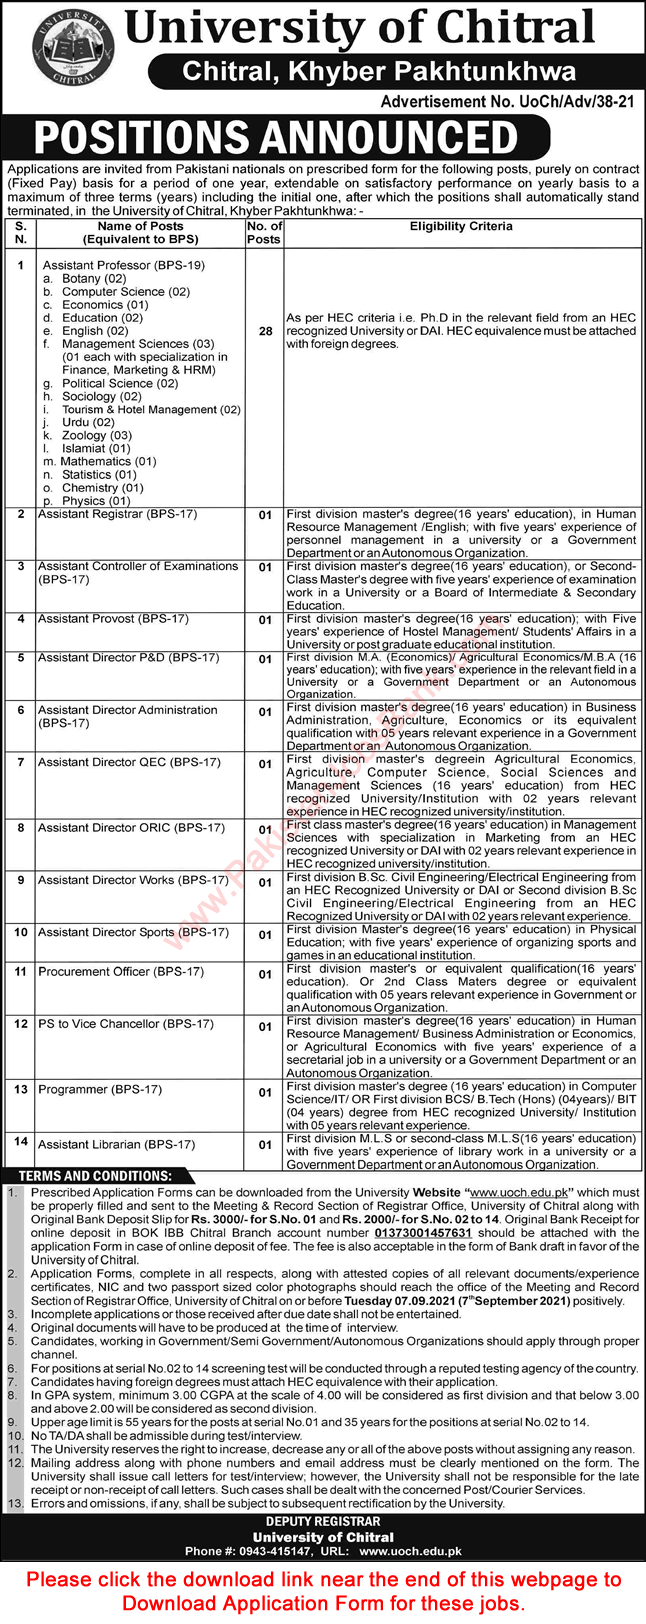 University of Chitral Jobs 2021 August Application Form Assistant Professors & Others Latest